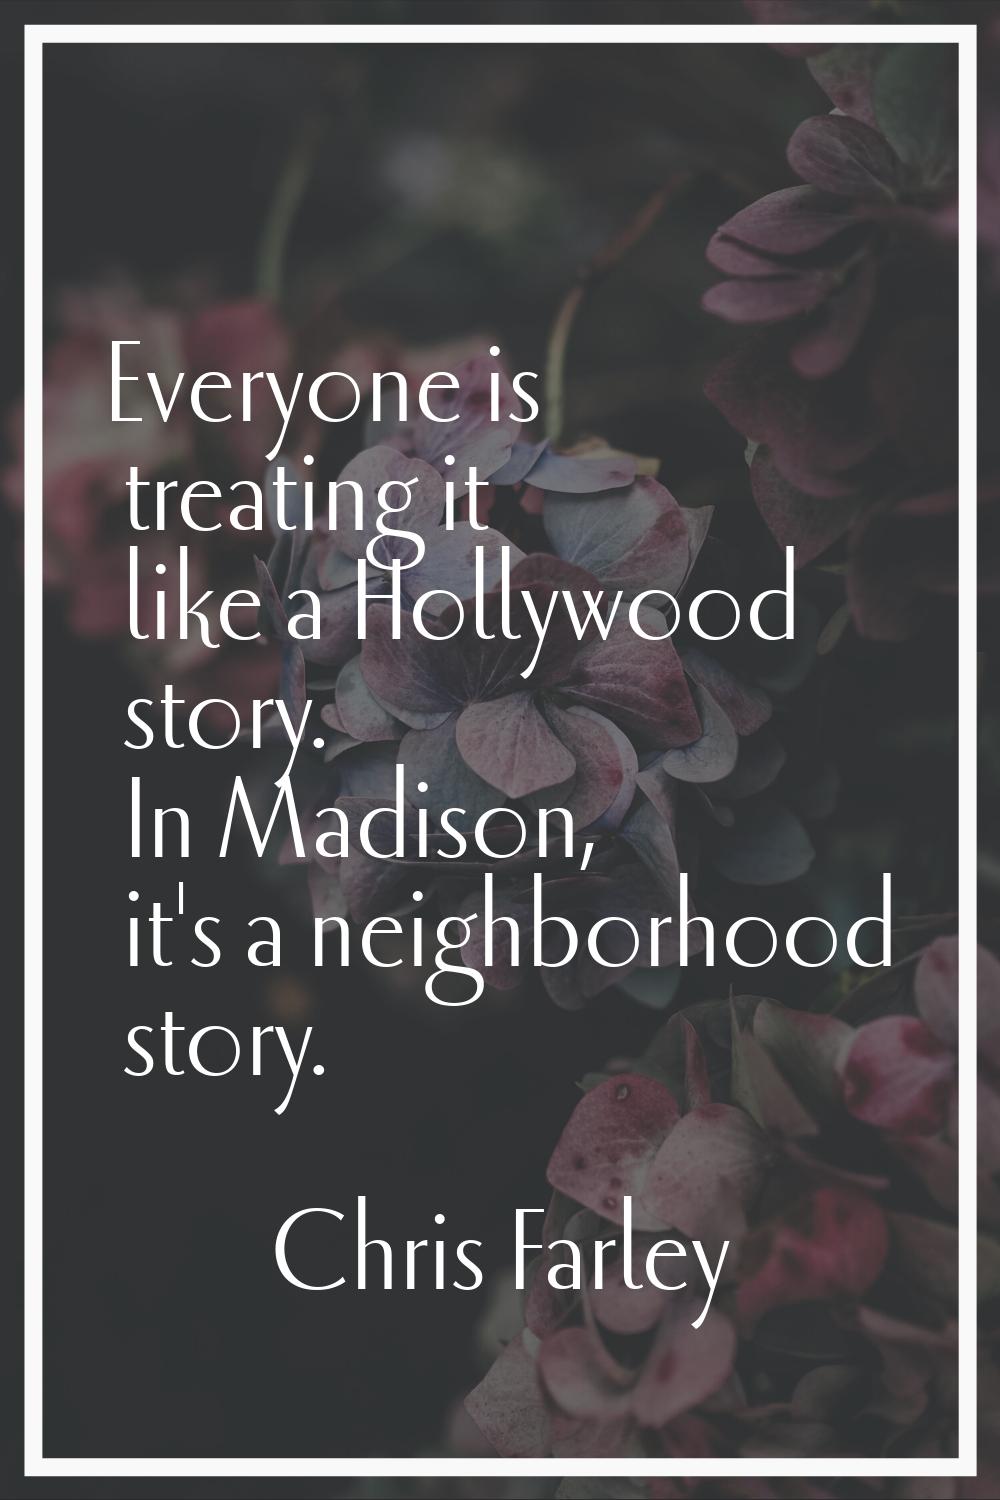 Everyone is treating it like a Hollywood story. In Madison, it's a neighborhood story.